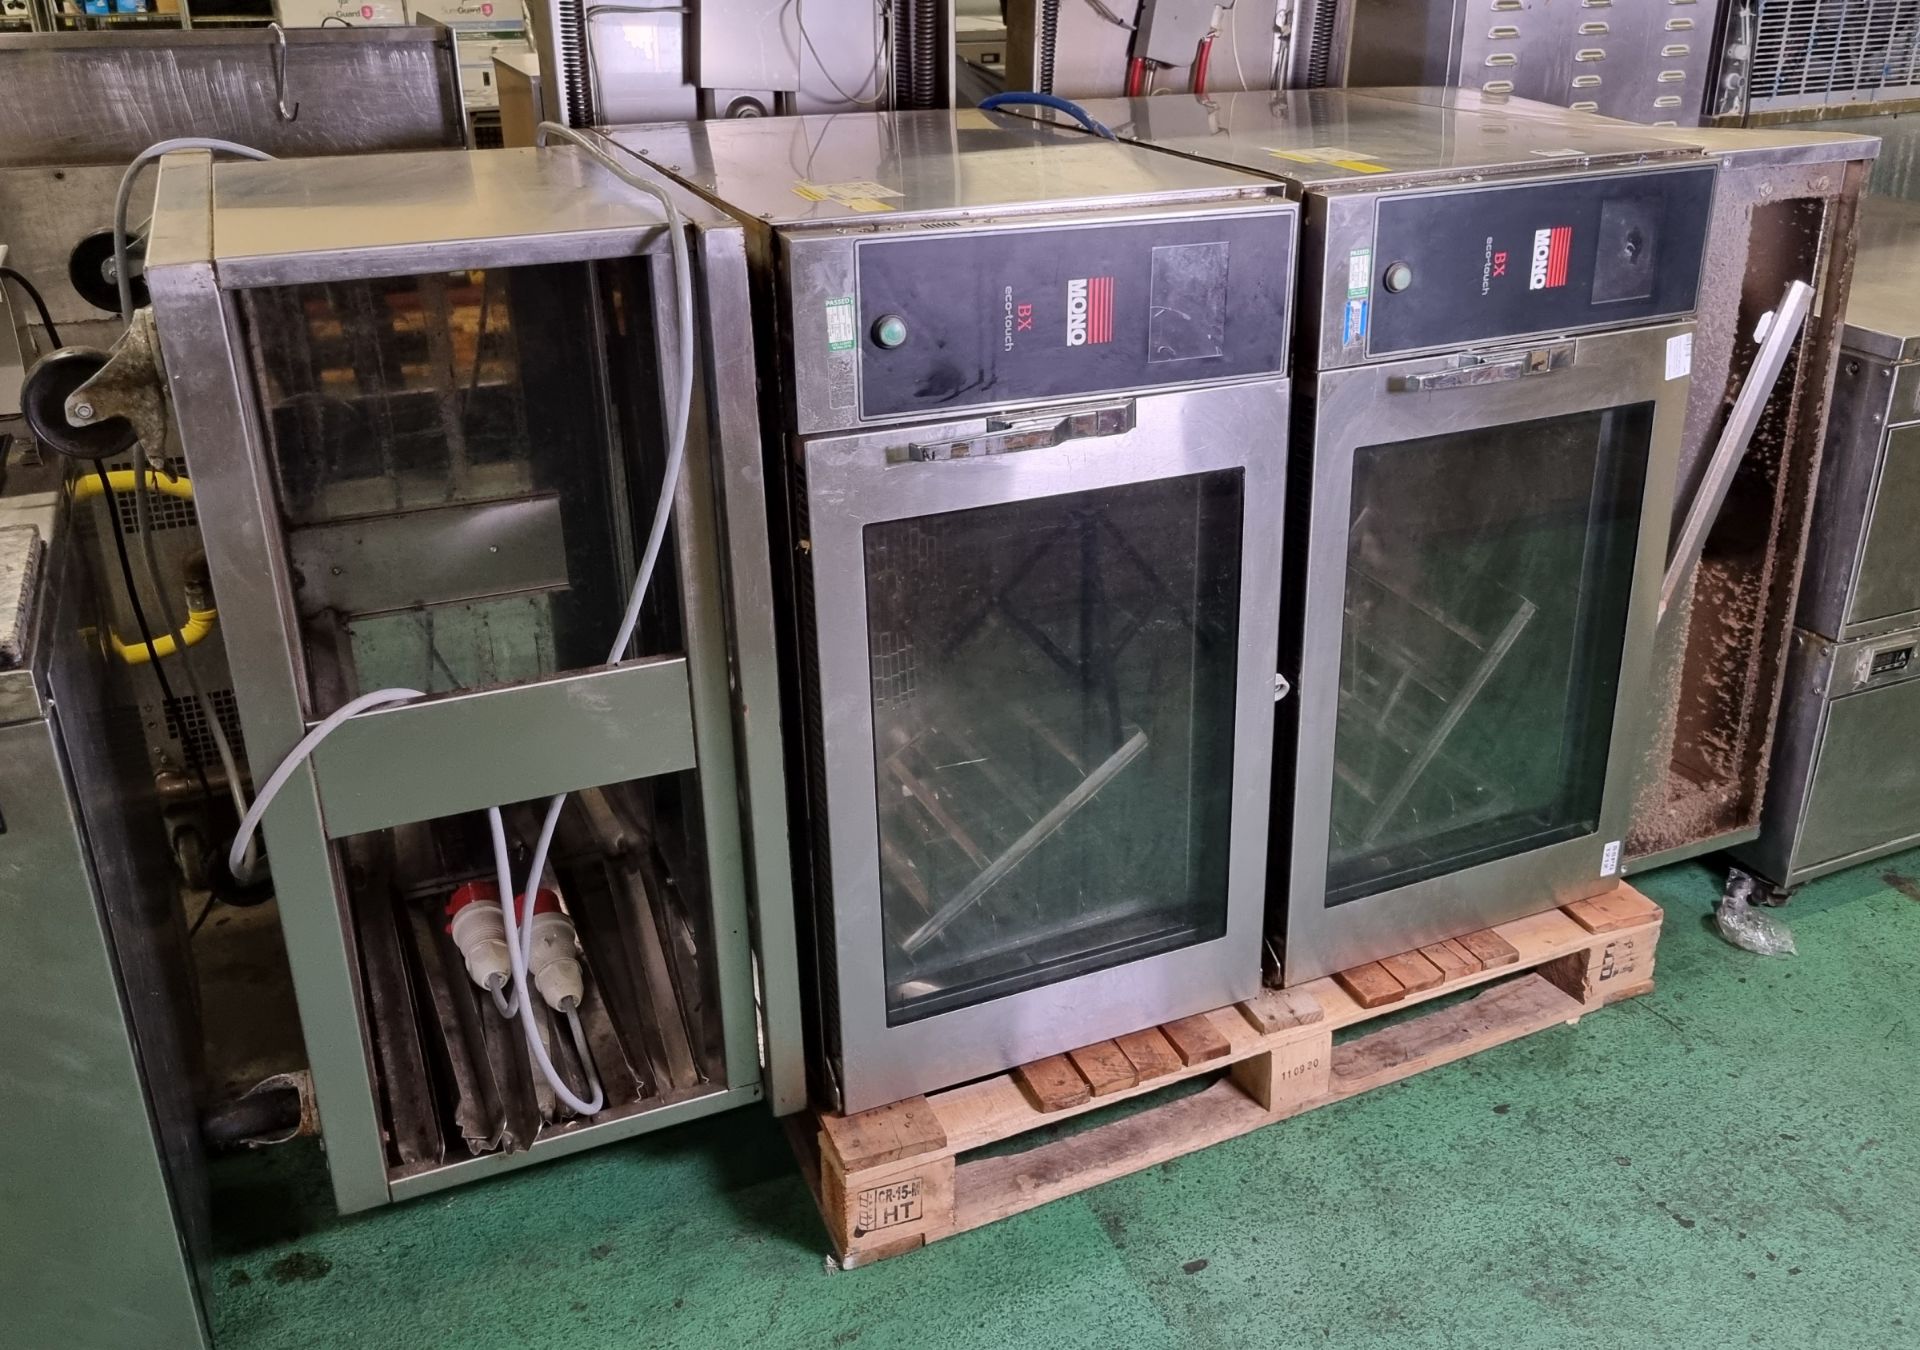 2x Mono FG158T-B54 BX Eco-touch commercial ovens - W 1020 x D 900 x H 2100 - Image 2 of 8